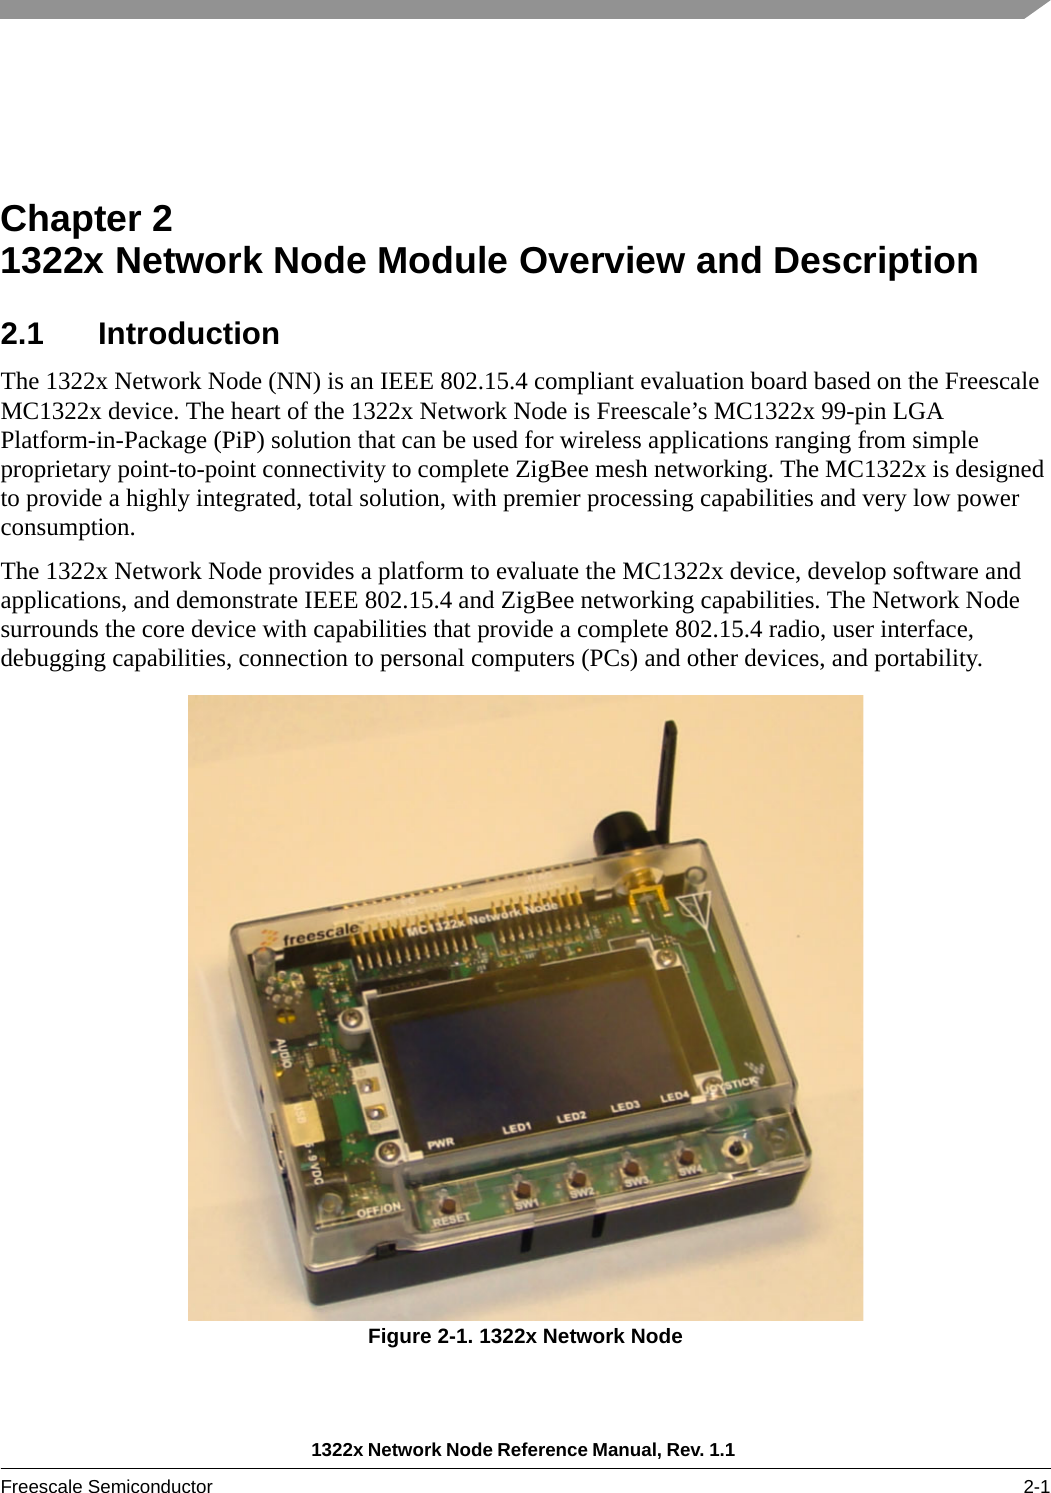 1322x Network Node Reference Manual, Rev. 1.1 Freescale Semiconductor 2-1Chapter 2  1322x Network Node Module Overview and Description2.1 IntroductionThe 1322x Network Node (NN) is an IEEE 802.15.4 compliant evaluation board based on the Freescale MC1322x device. The heart of the 1322x Network Node is Freescale’s MC1322x 99-pin LGA Platform-in-Package (PiP) solution that can be used for wireless applications ranging from simple proprietary point-to-point connectivity to complete ZigBee mesh networking. The MC1322x is designed to provide a highly integrated, total solution, with premier processing capabilities and very low power consumption.The 1322x Network Node provides a platform to evaluate the MC1322x device, develop software and applications, and demonstrate IEEE 802.15.4 and ZigBee networking capabilities. The Network Node surrounds the core device with capabilities that provide a complete 802.15.4 radio, user interface, debugging capabilities, connection to personal computers (PCs) and other devices, and portability.Figure 2-1. 1322x Network Node 